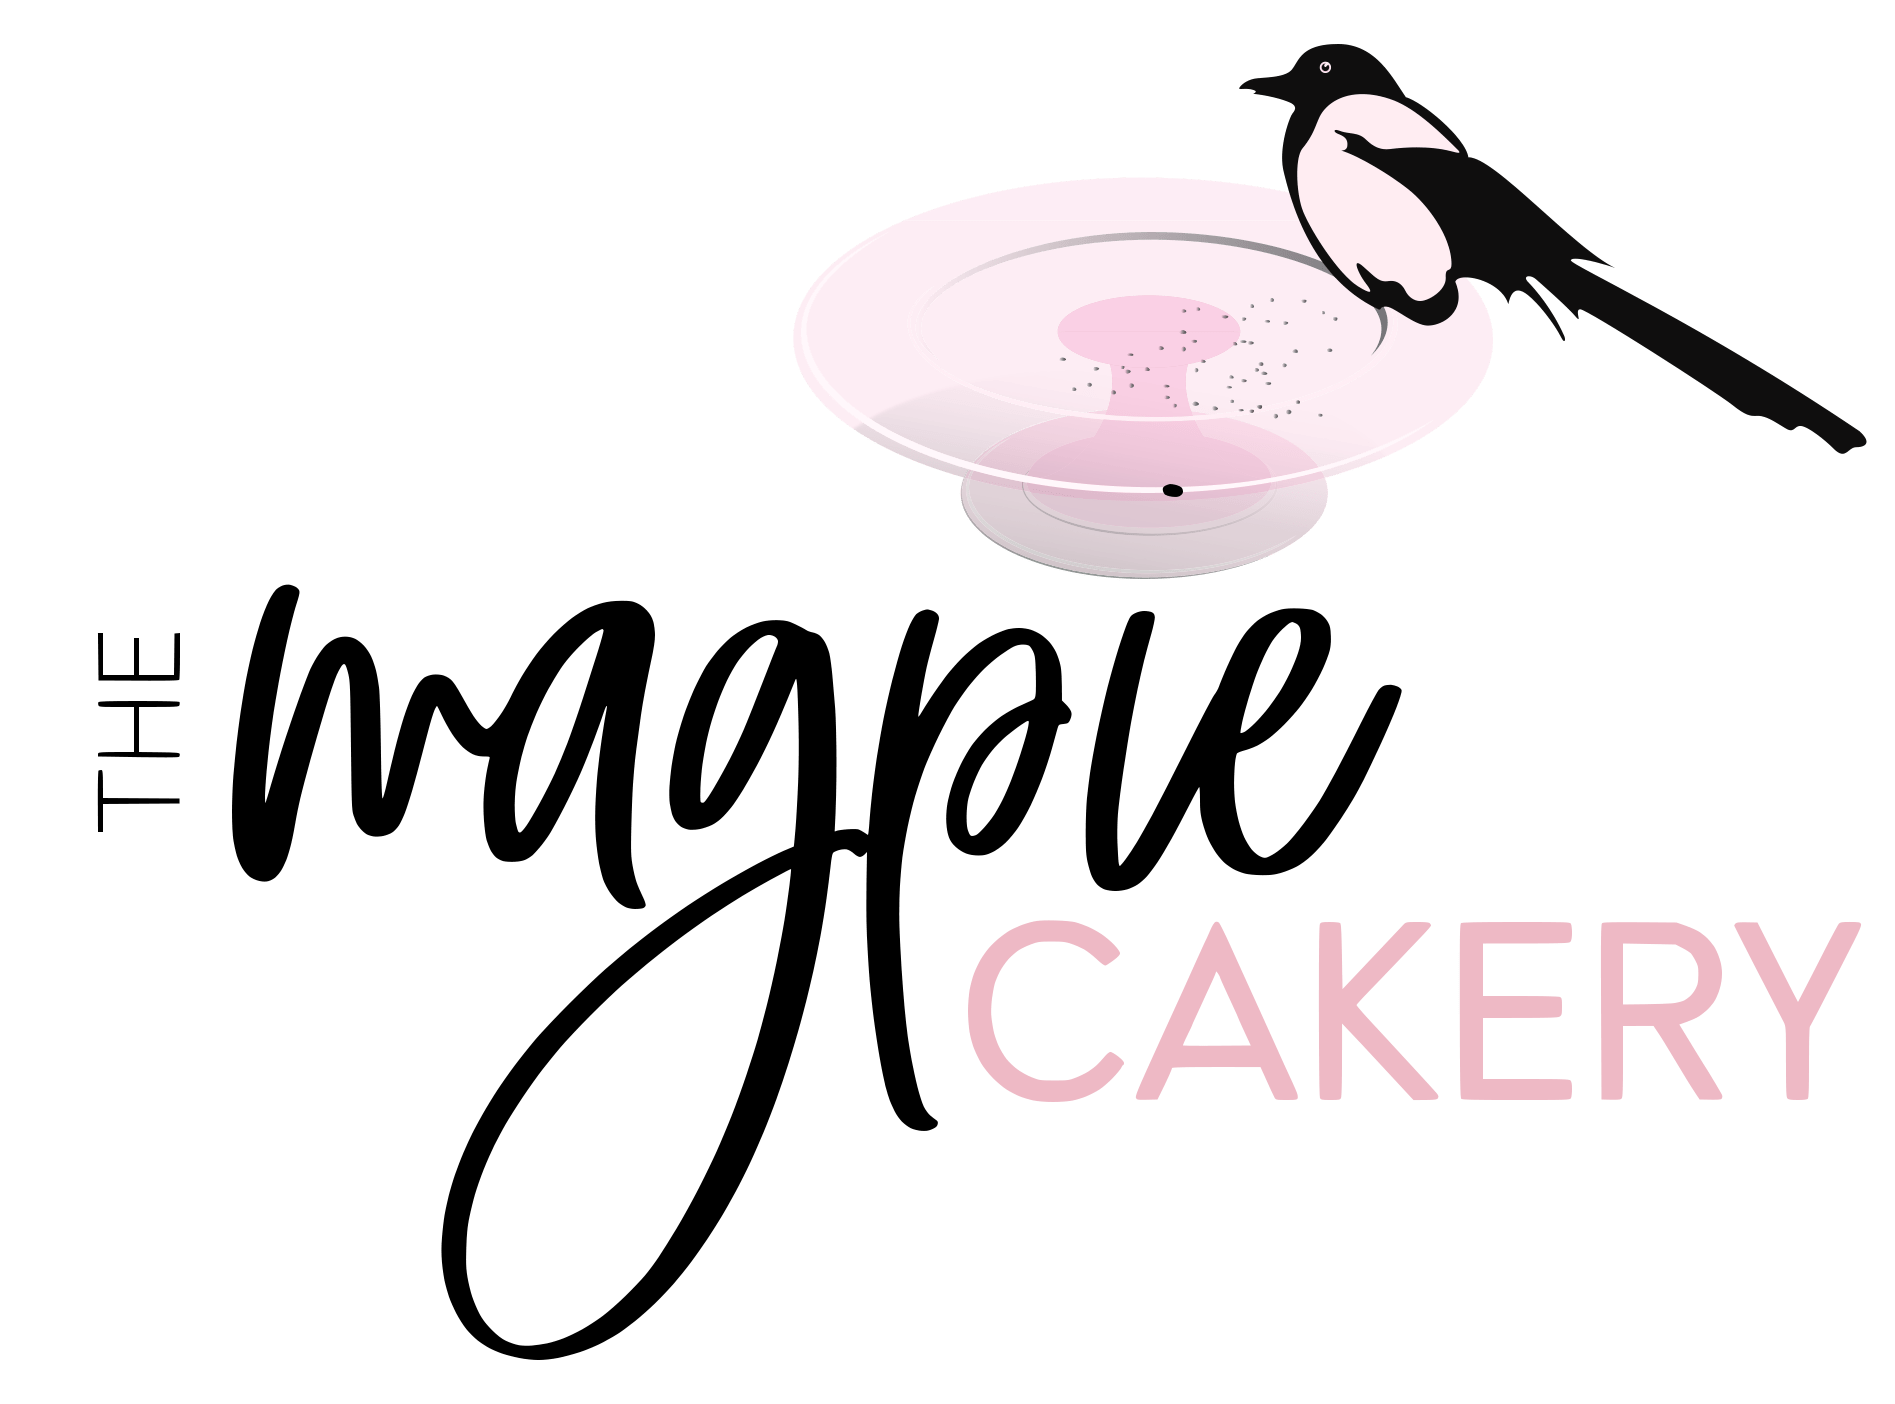 Magpie Cakery Summer Baking